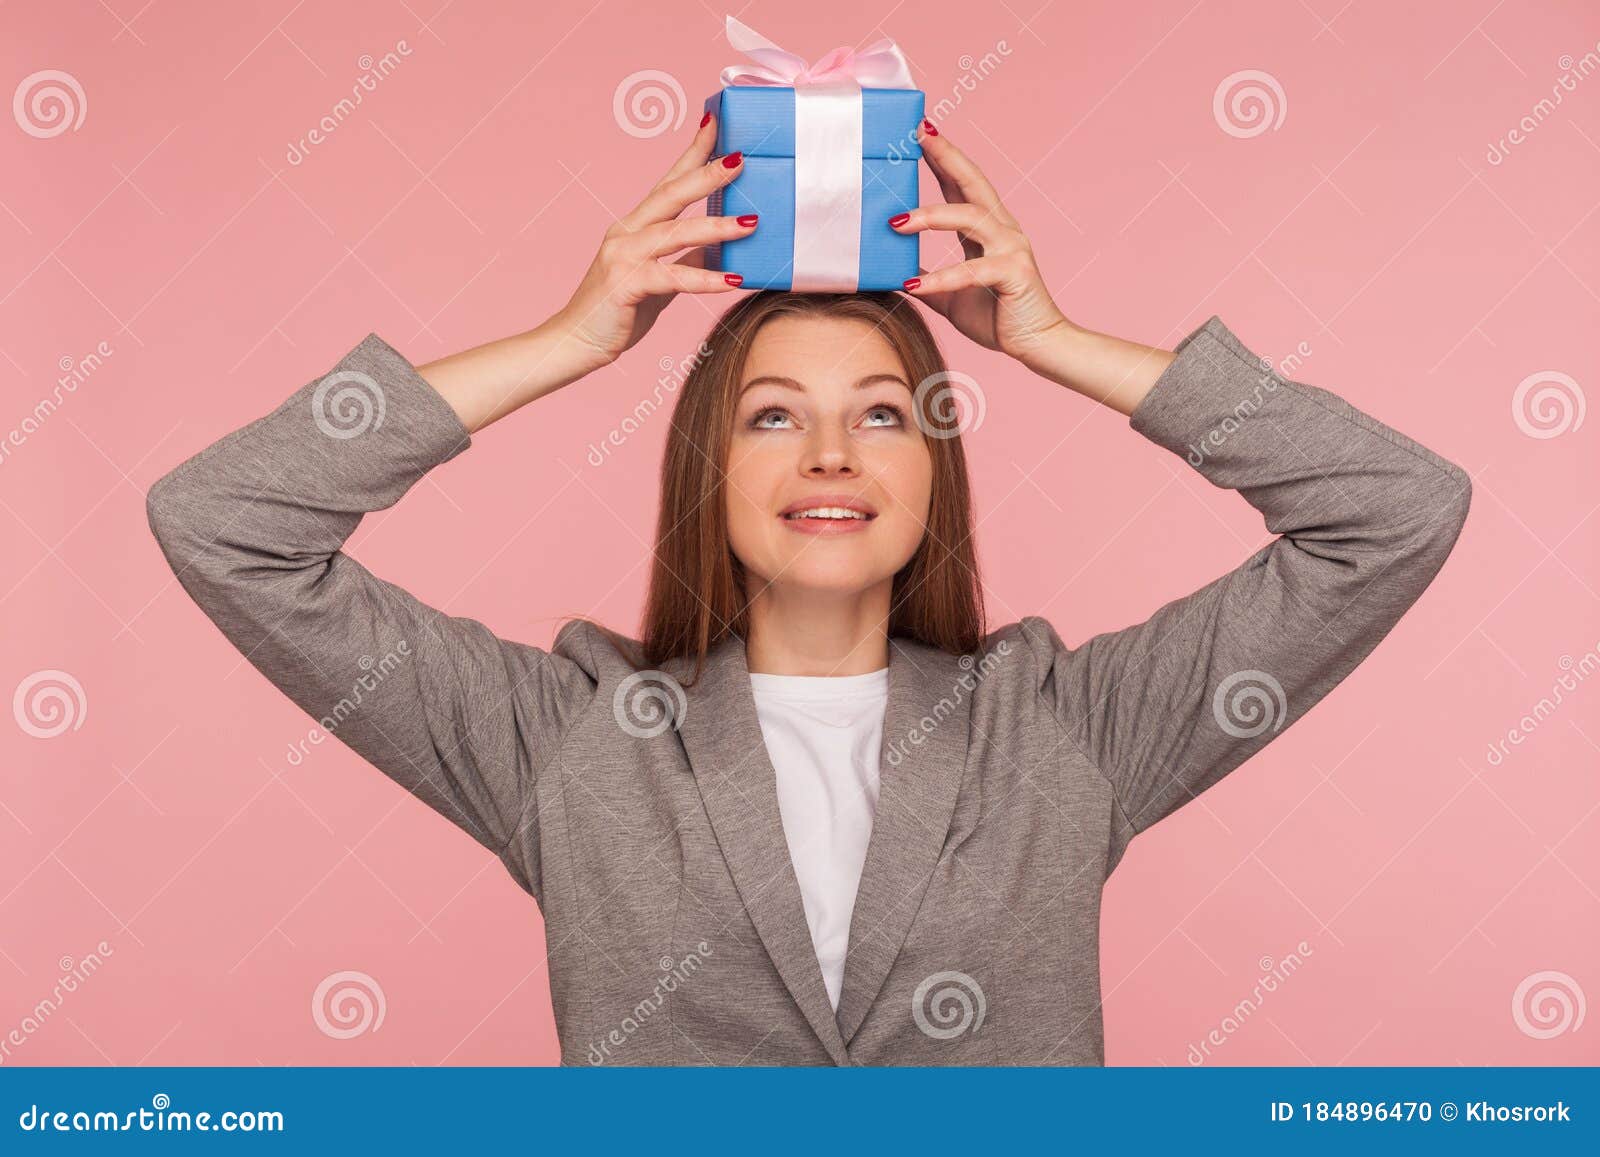 portrait of funny joyful businesswoman in suit jacket holding present on head and smiling, celebrating anniversary